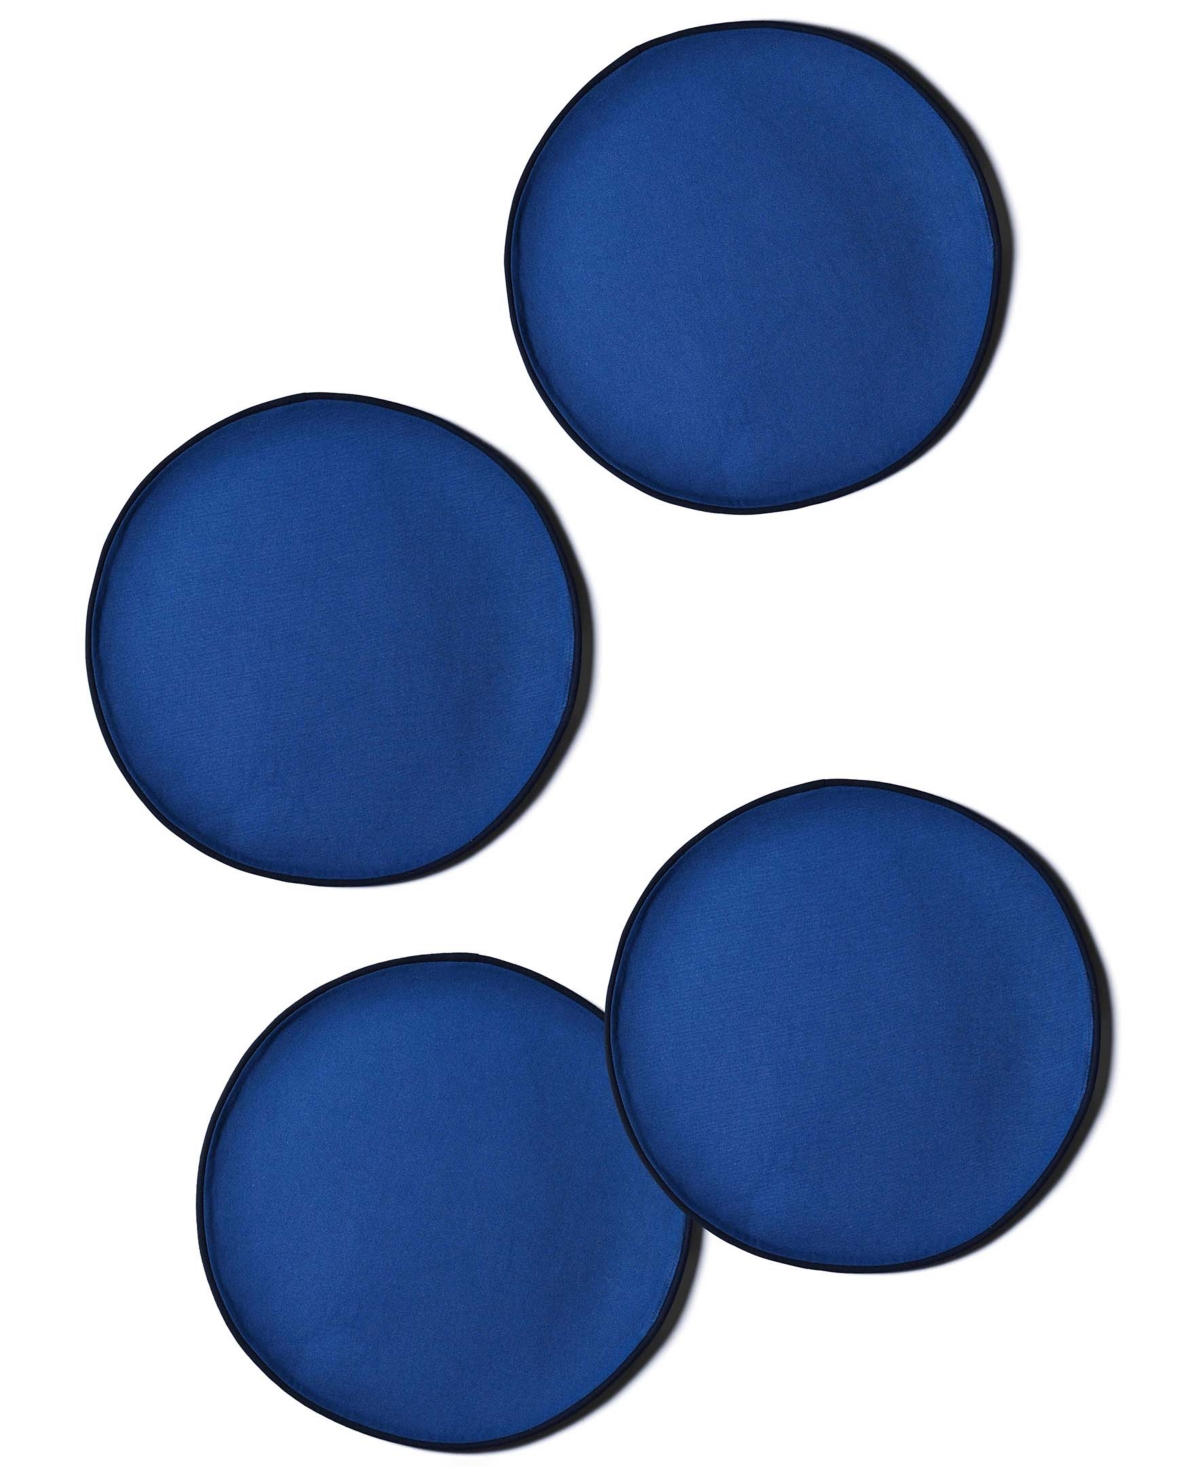 Coton Colors Block Round Placemat Set Of 4, Service For 4 In Navy